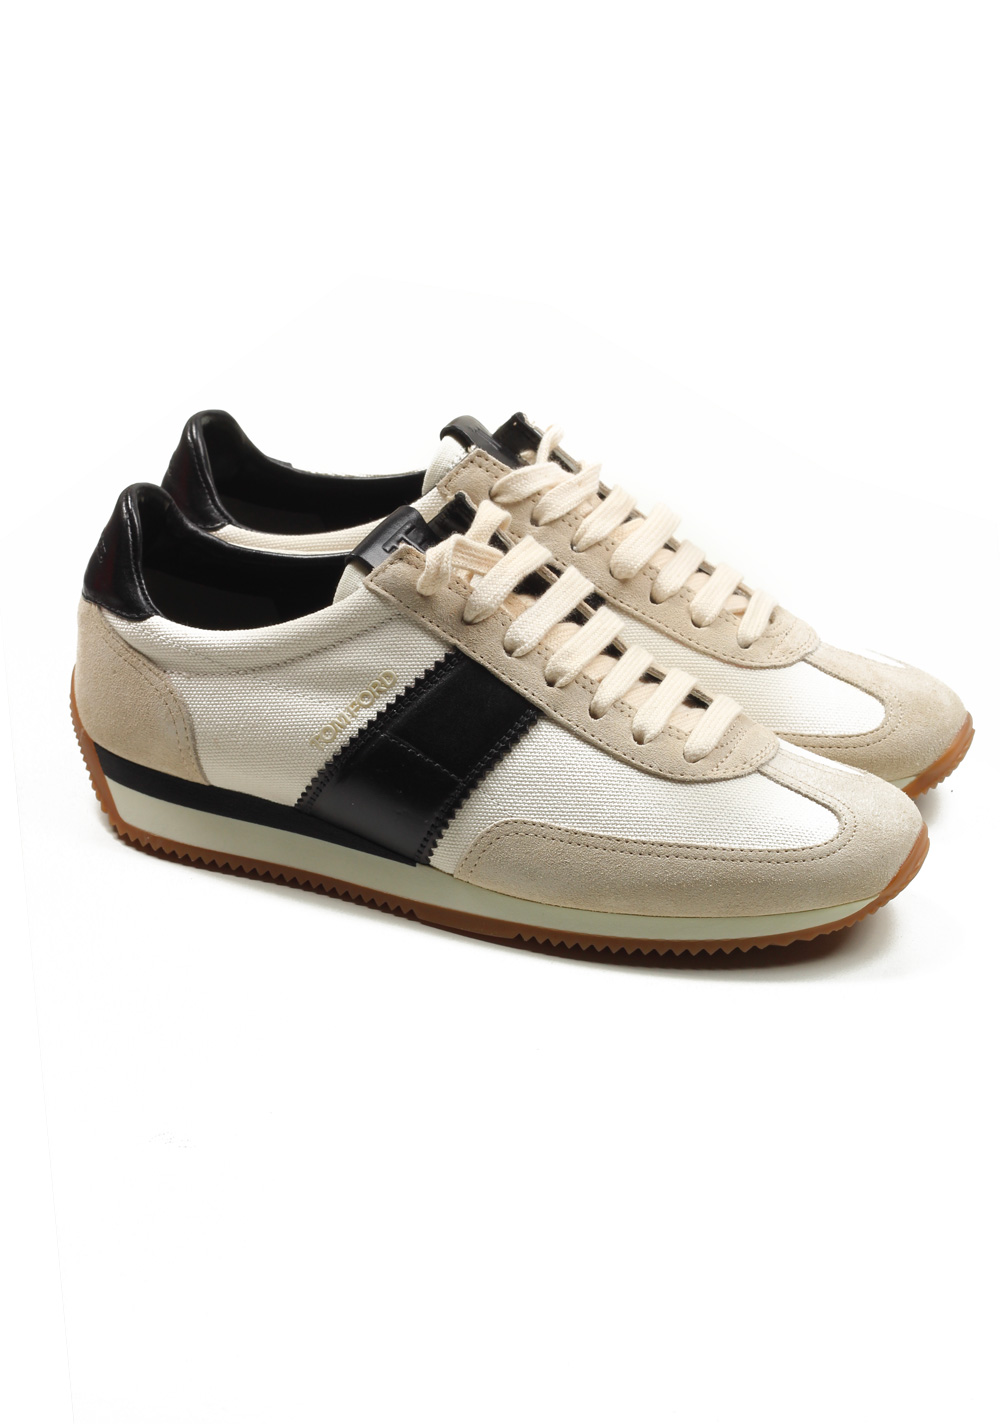 TOM FORD Orford Colorblock Suede White Black Trainer Sneaker Shoes Size ...